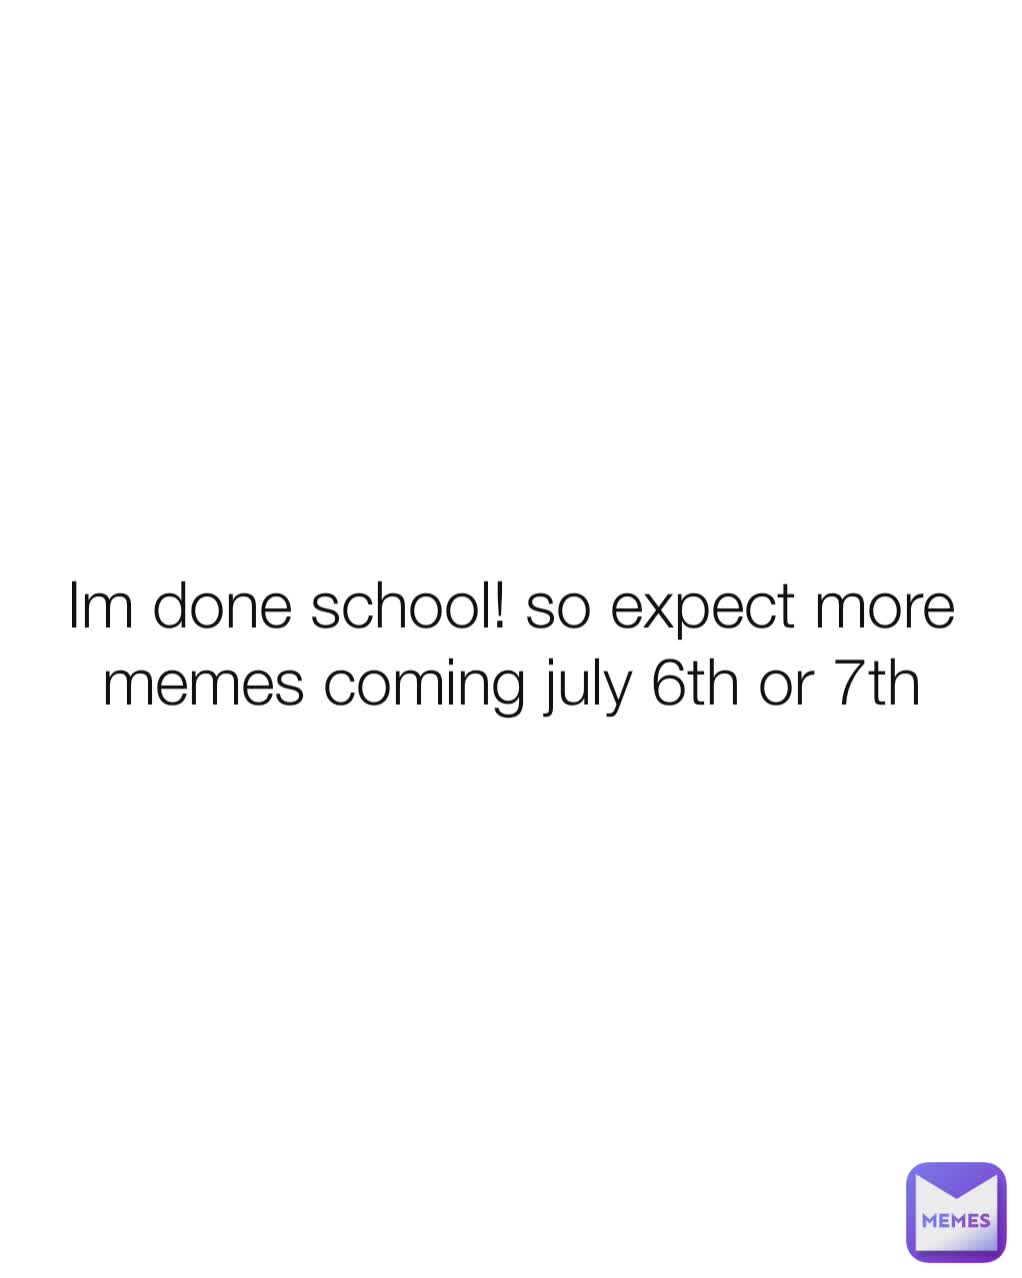 Im done school! so expect more memes coming july 6th or 7th